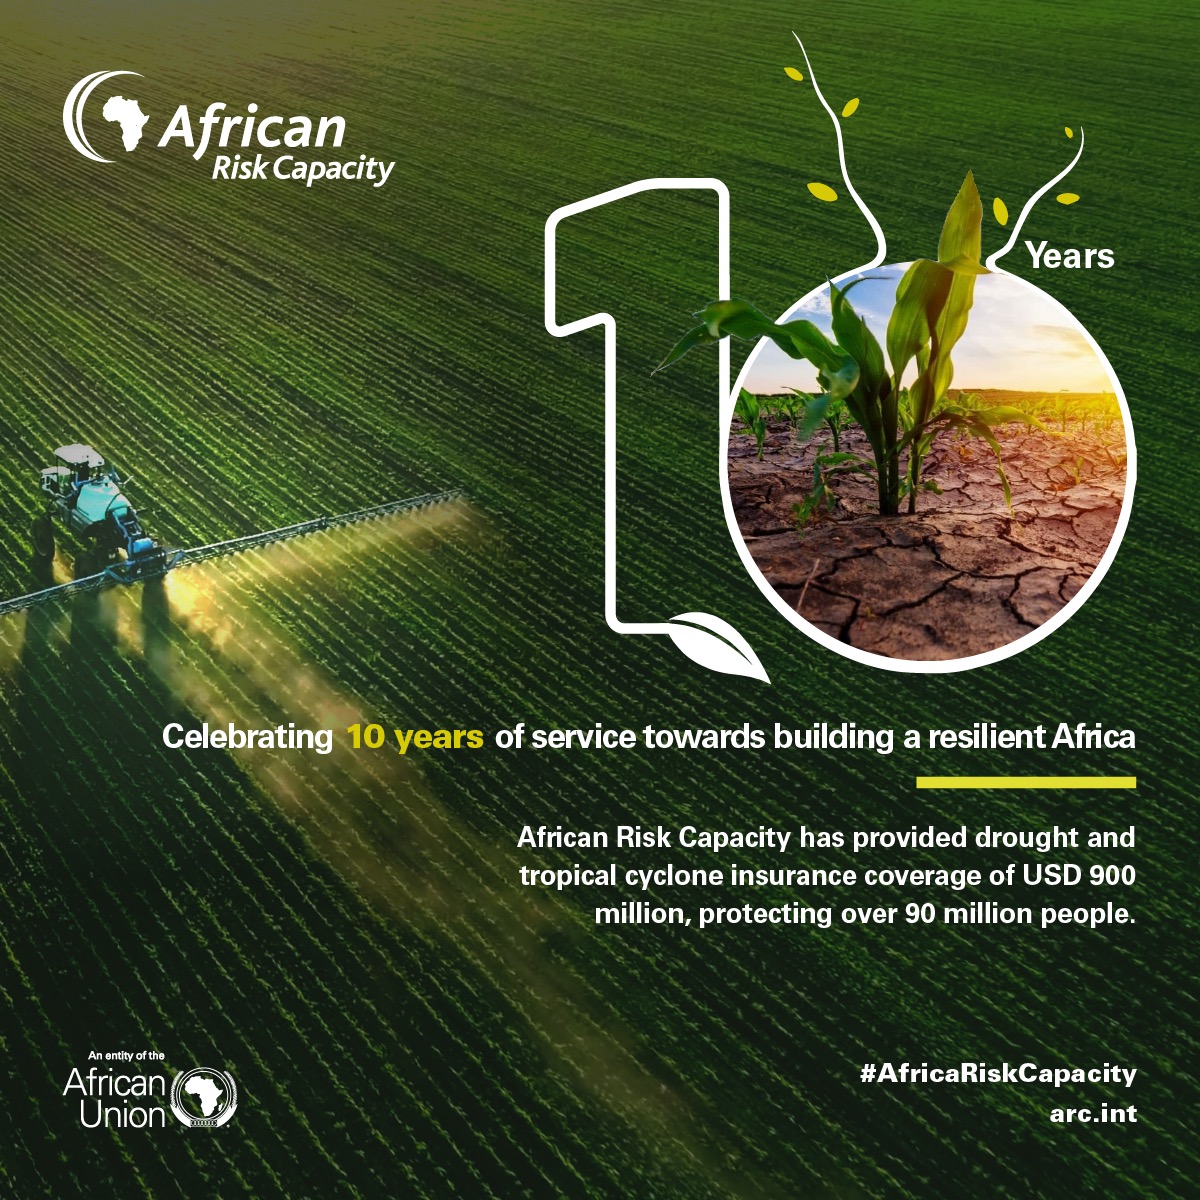 African Risk Capacity has provided drought & tropical cyclone insurance coverage of $900M, protecting over 90M people, & preventing loss of lives &livelihoods. ARC builds capacities for national experts in risk modelling for contingent planning. Learn more-au.int/en/newsevents/…